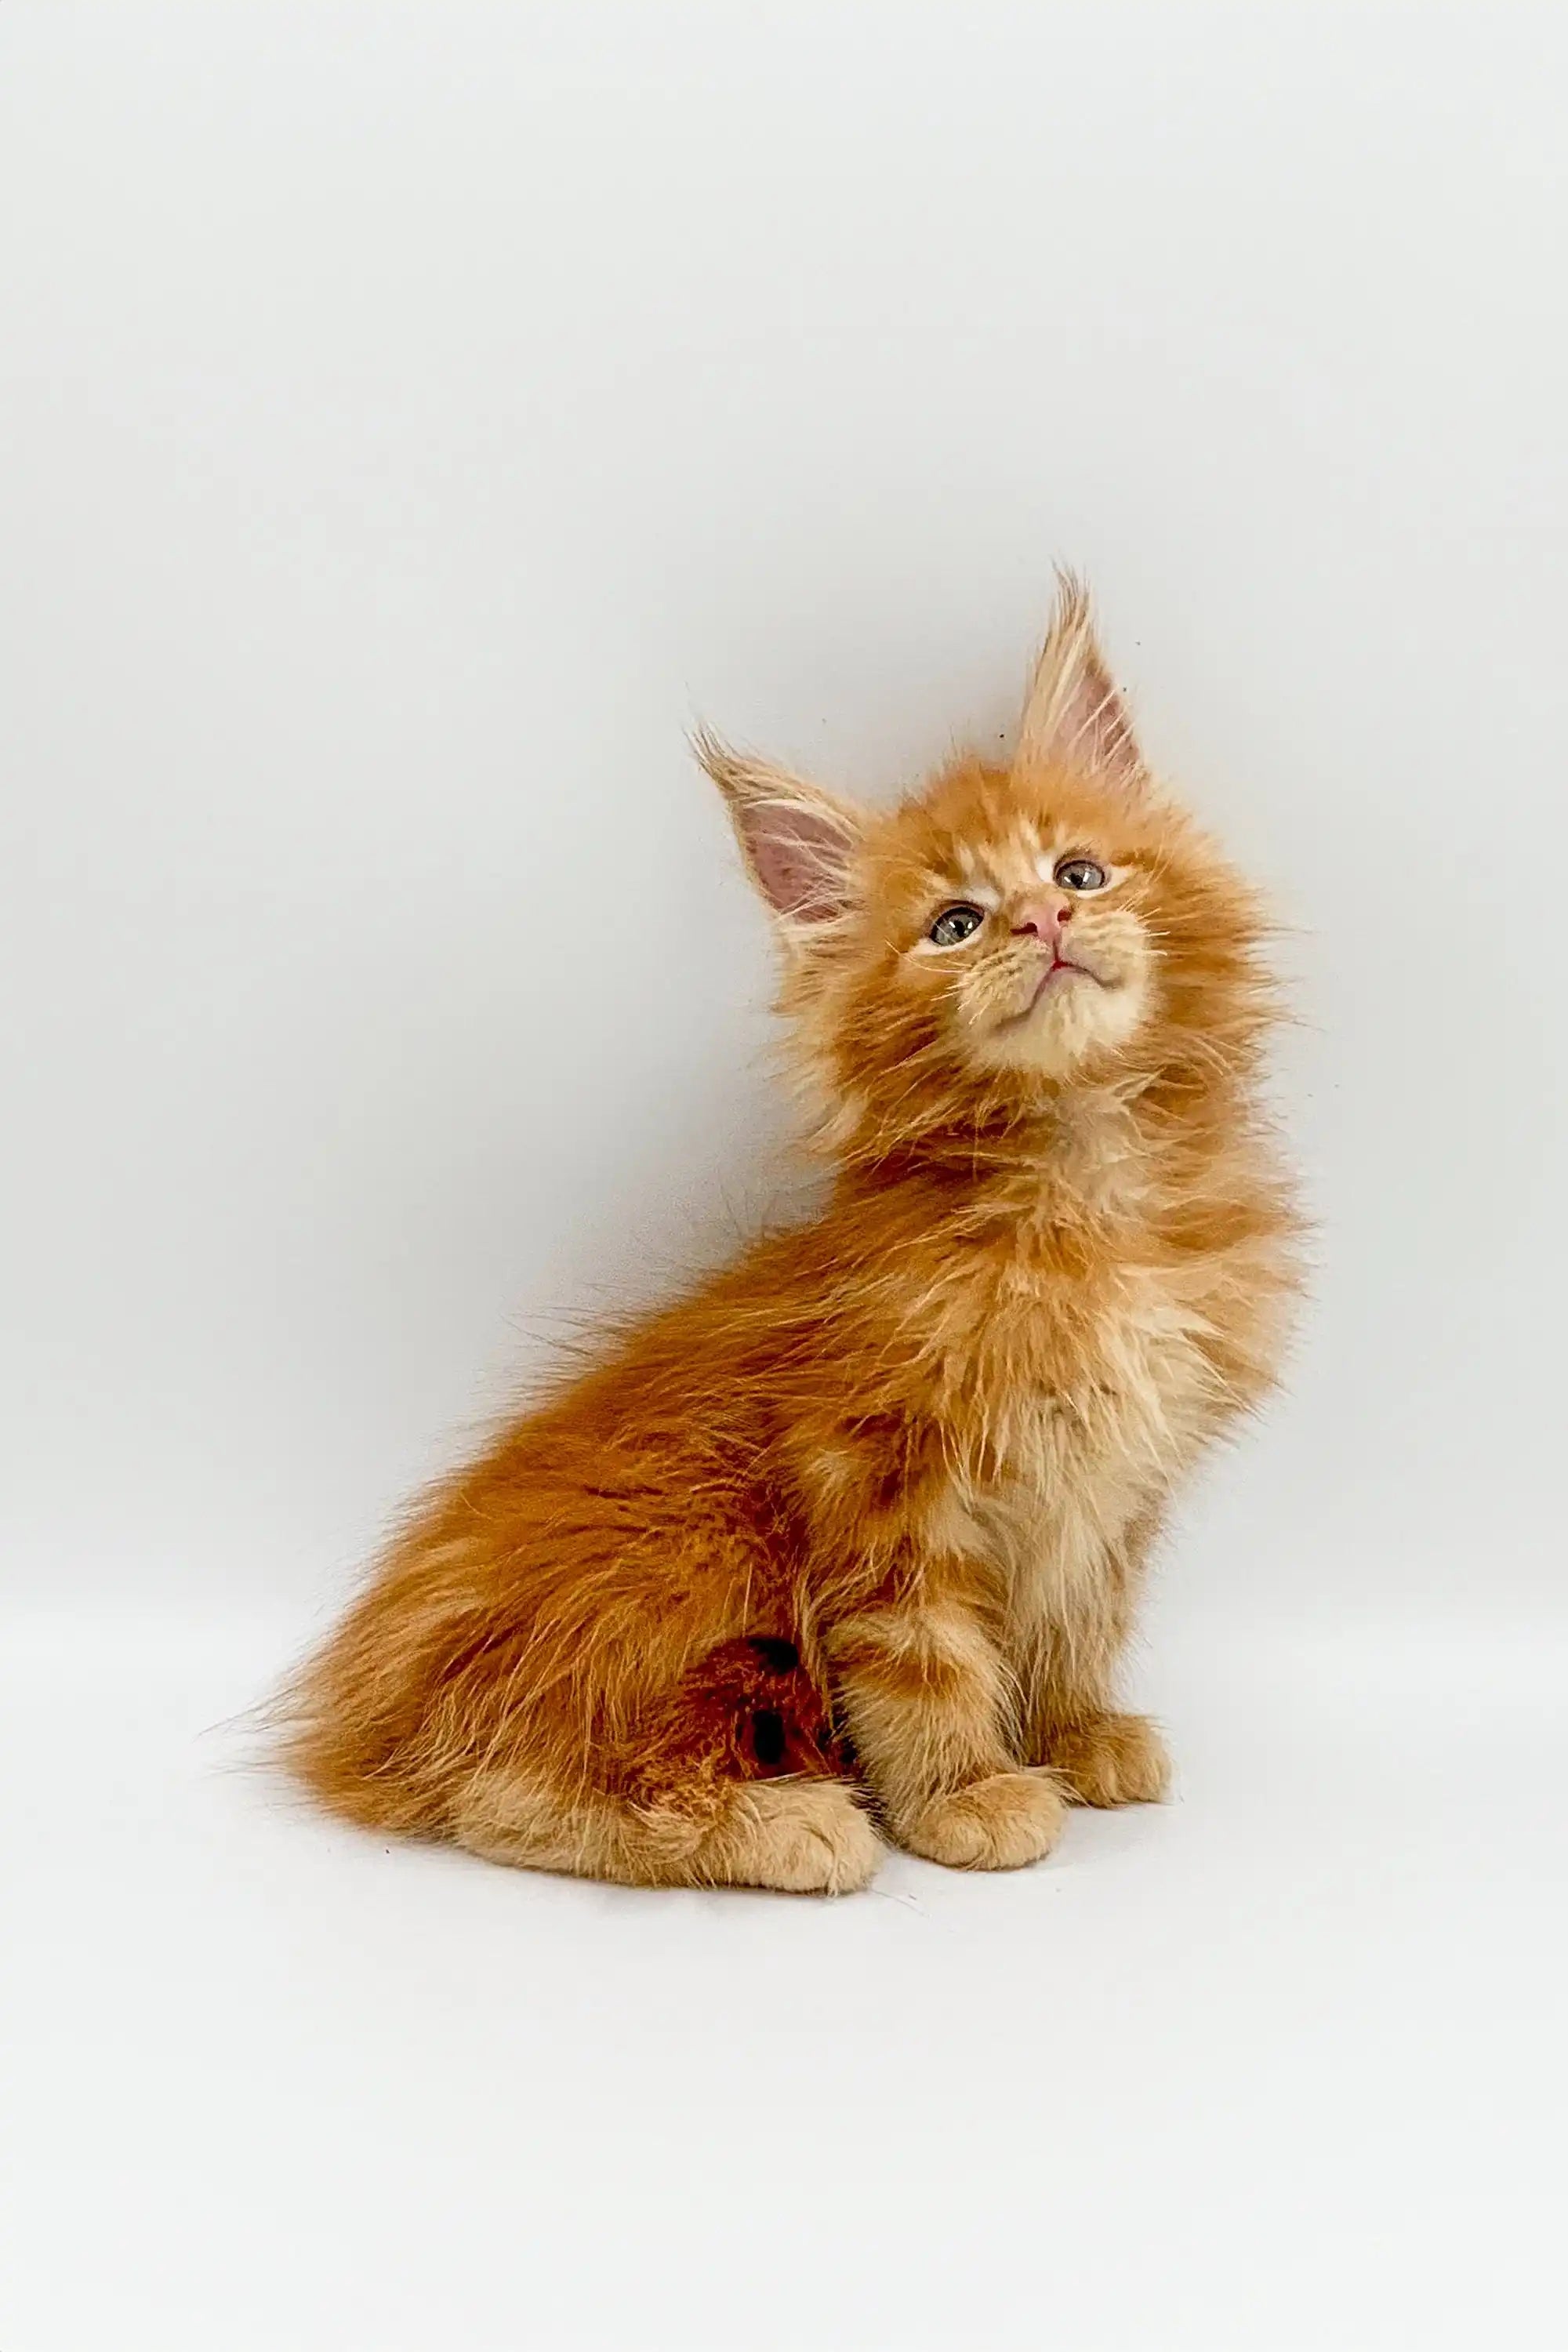 Maine Coon Kittens for Sale Owes | Kitten